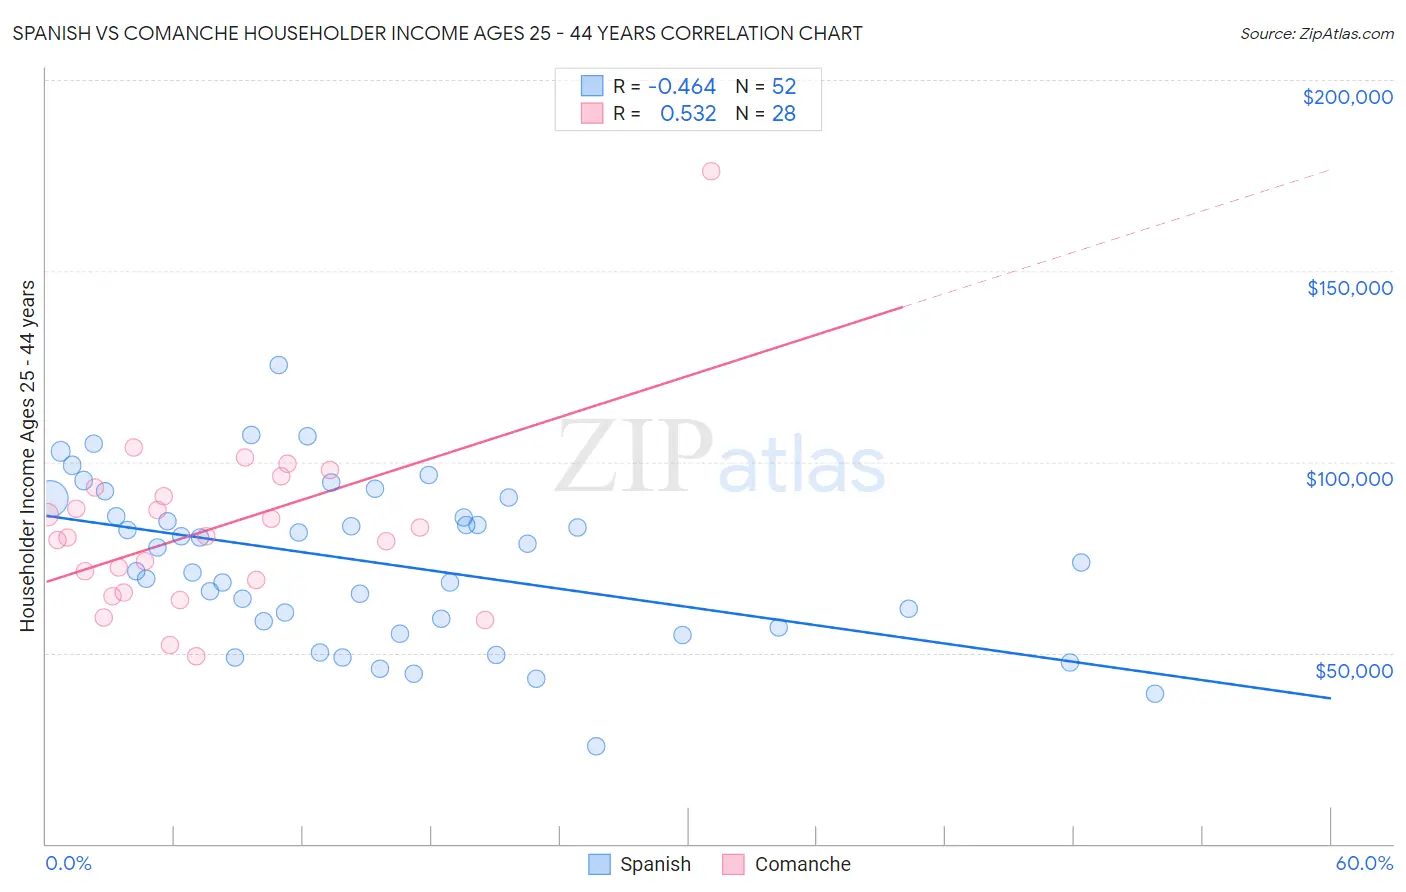 Spanish vs Comanche Householder Income Ages 25 - 44 years